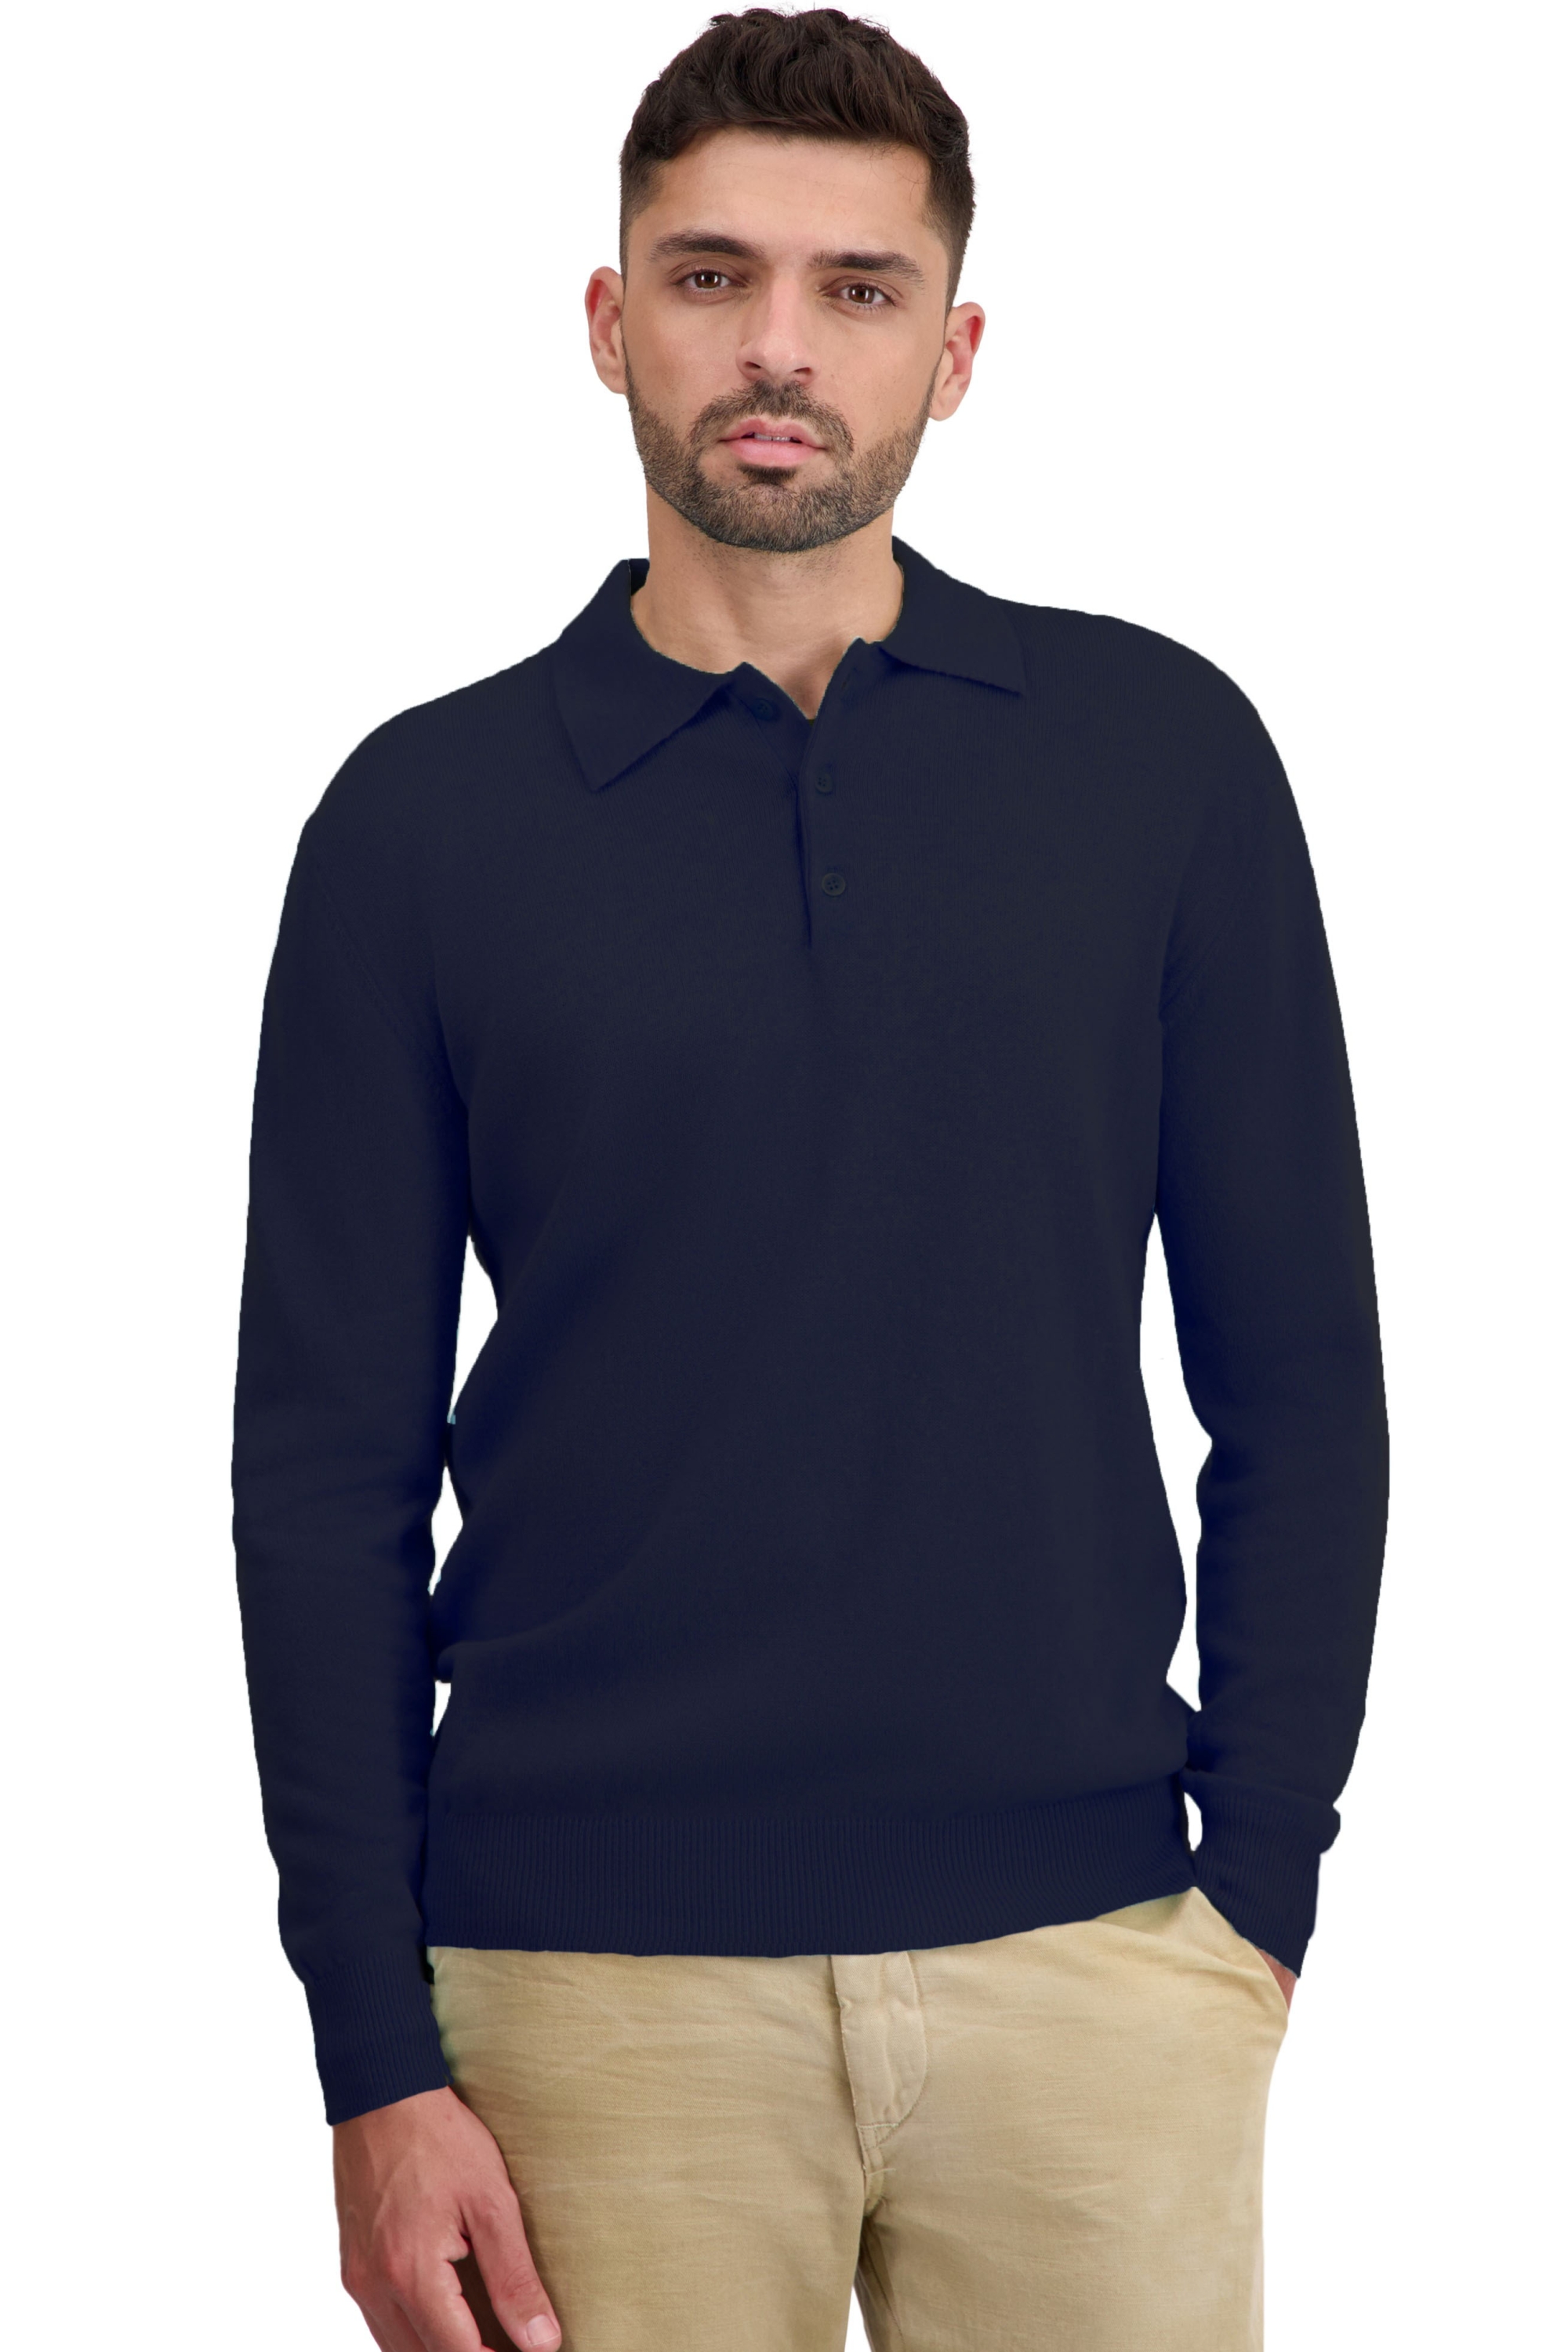 Cachemire polo camionneur homme tarn first marine fonce l